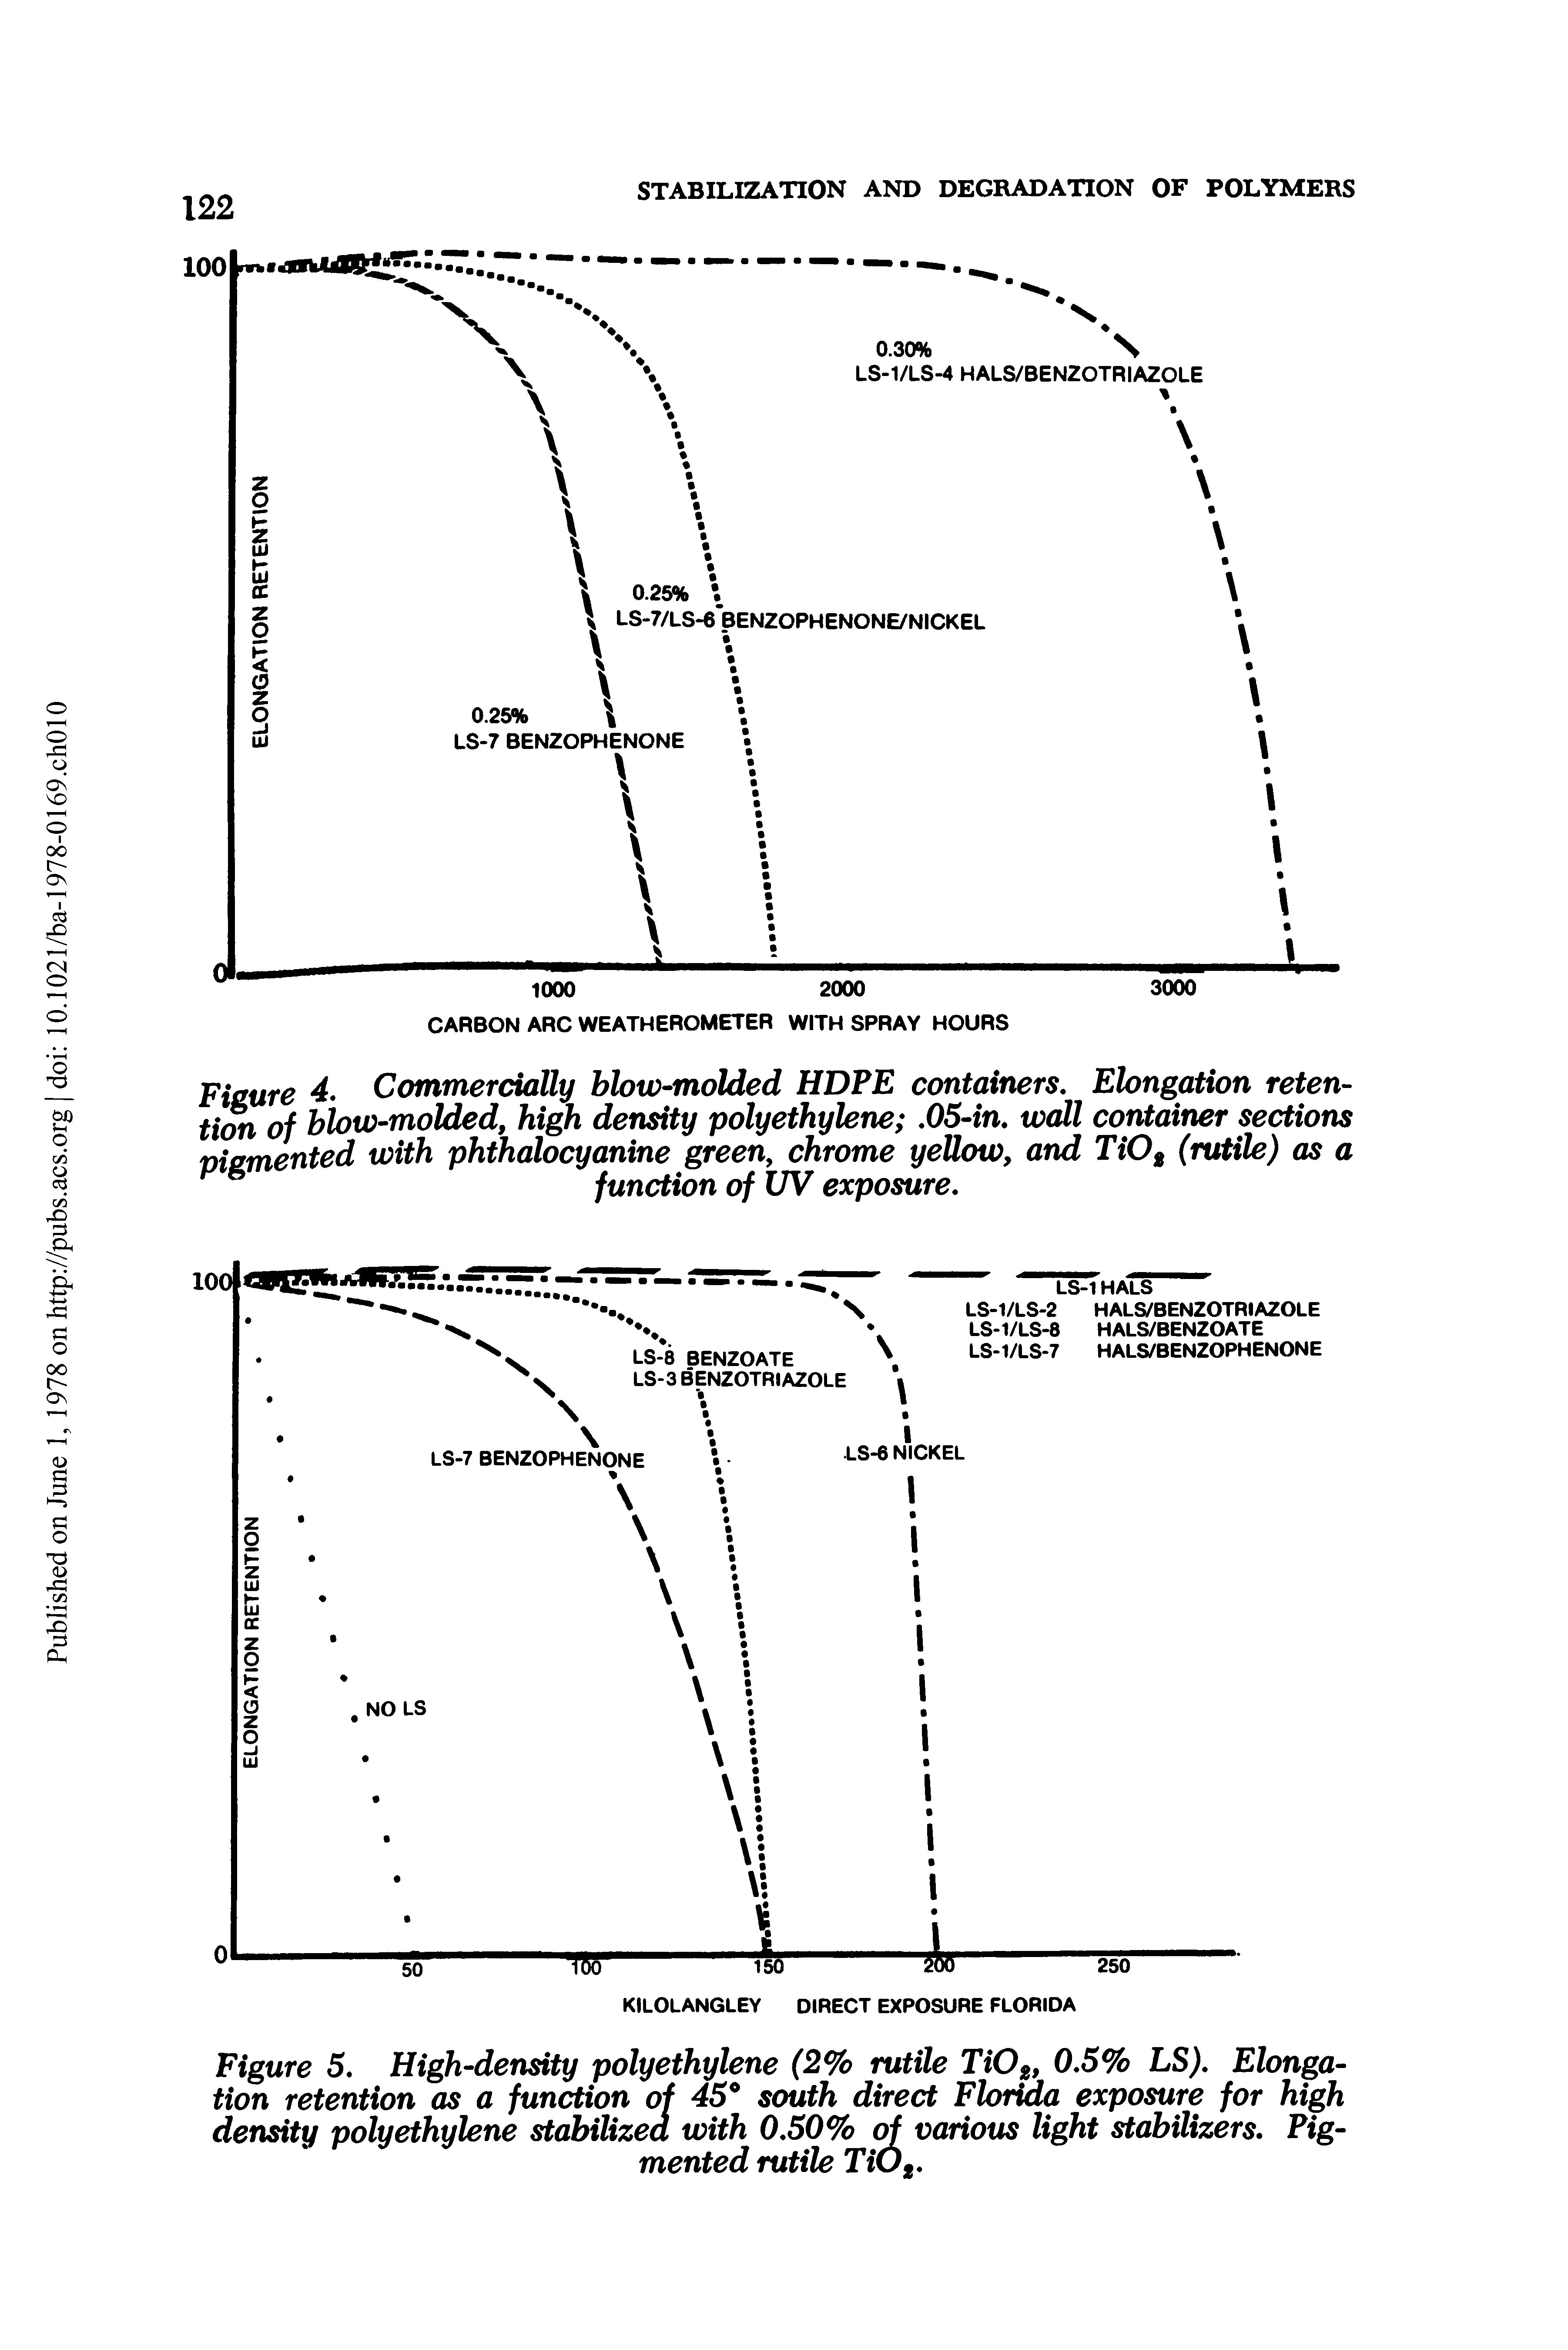 Figure 5. High-density polyethylene (2% rutile Ti02, 0.5% LS). Elongation retention as a function of 45° south direct Florida exposure for high density polyethylene stabilized with 0.50% of various light stabilizers. Pigmented rutile TiOt.